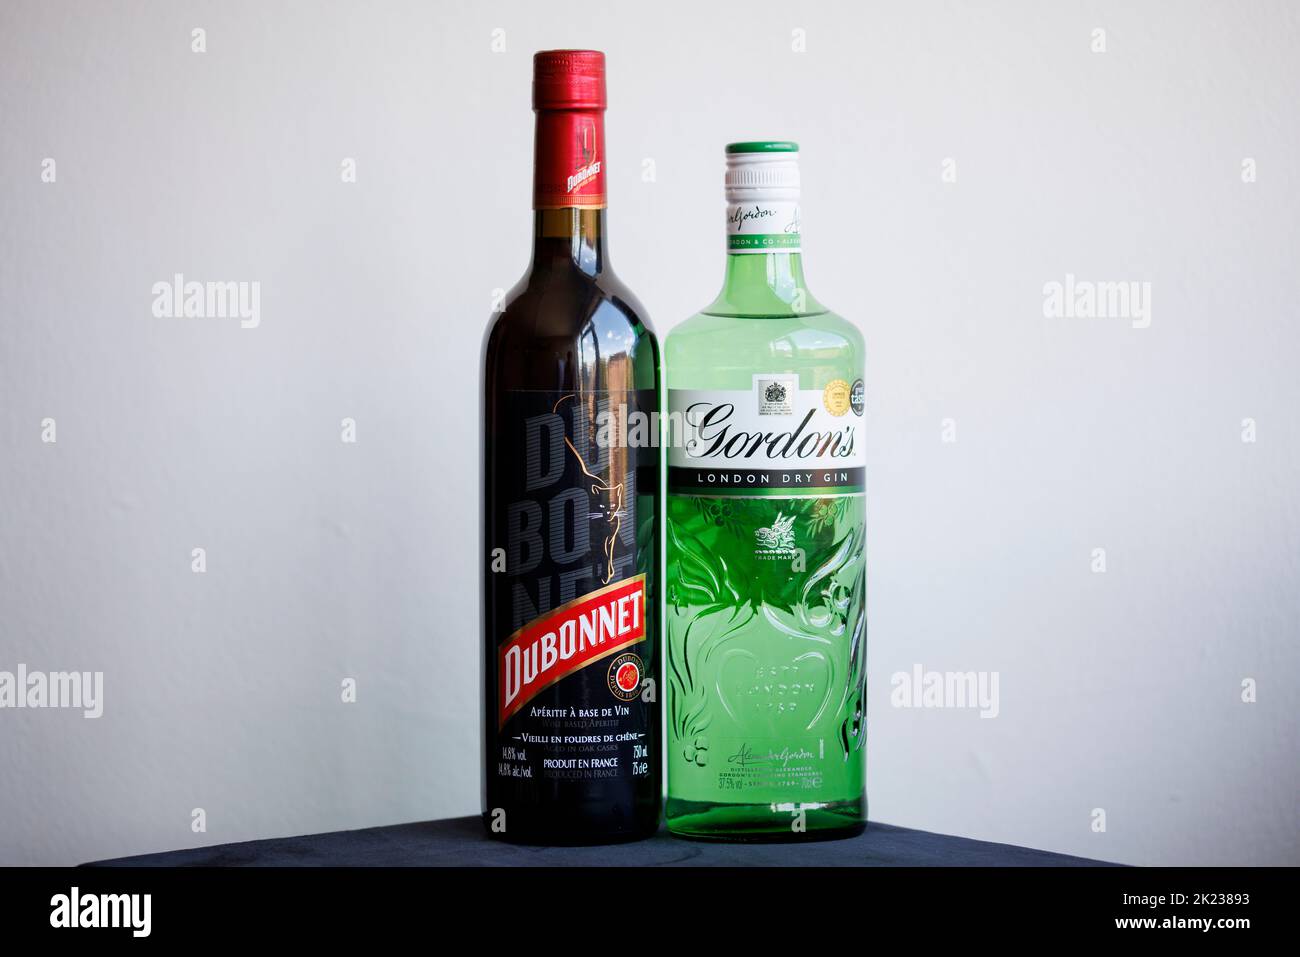 Dubonnet and Gin cocktail ingredients, favoured by Her Majesty Queen Elizabeth II as a lunchtime drink Stock Photo